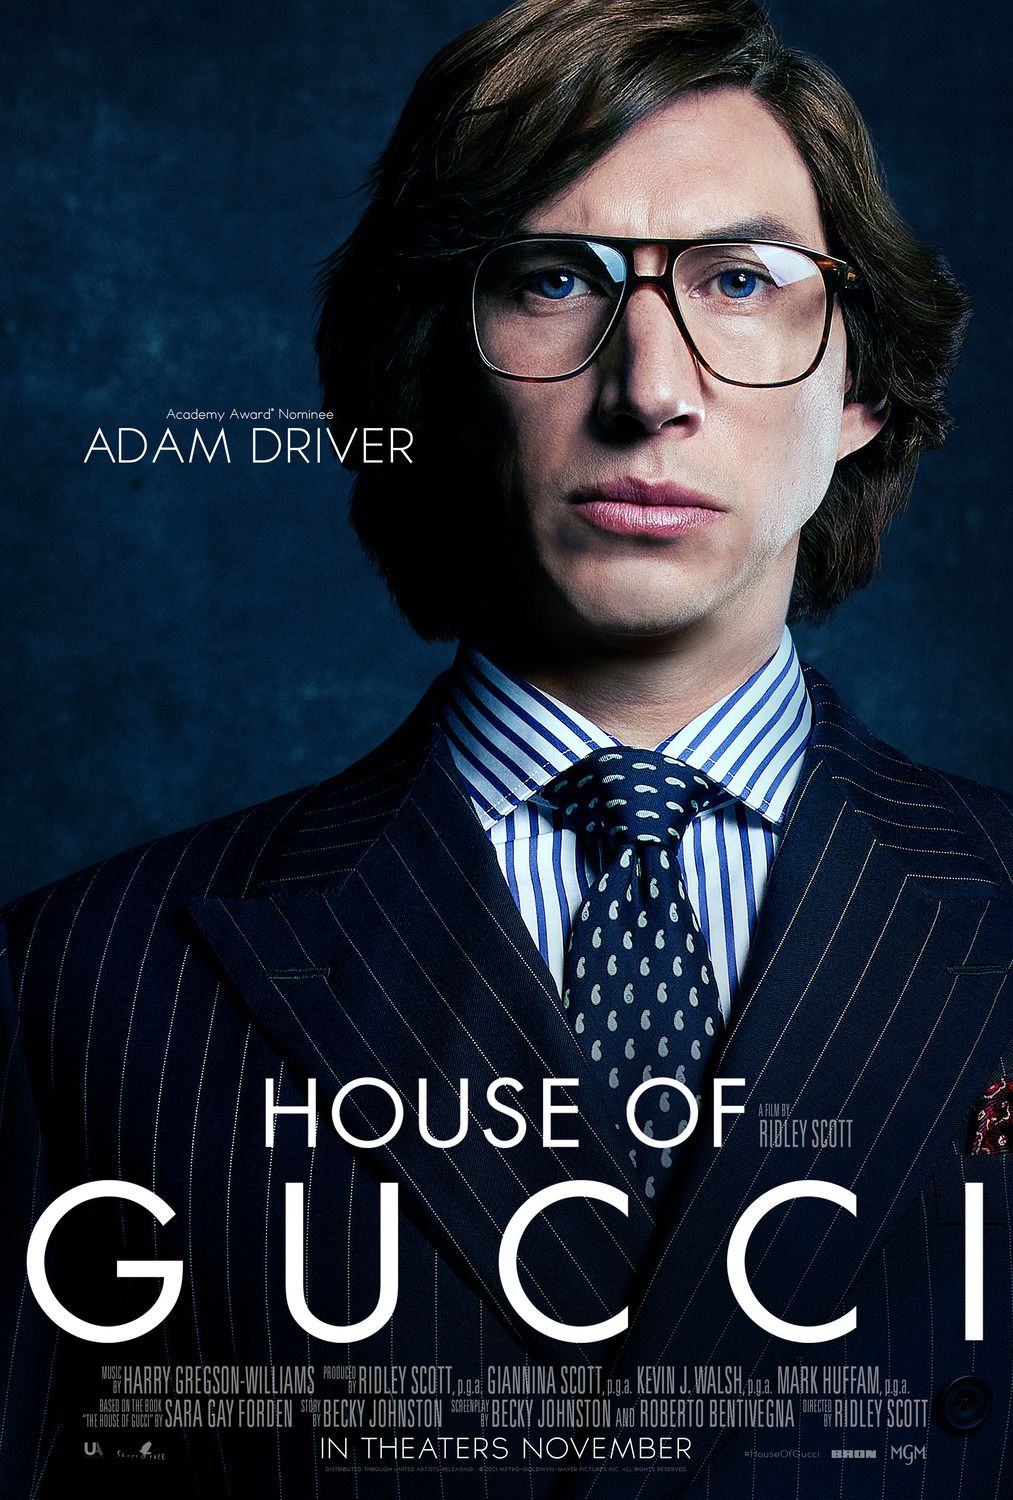 House of Gucci poster #1 Adam Driver